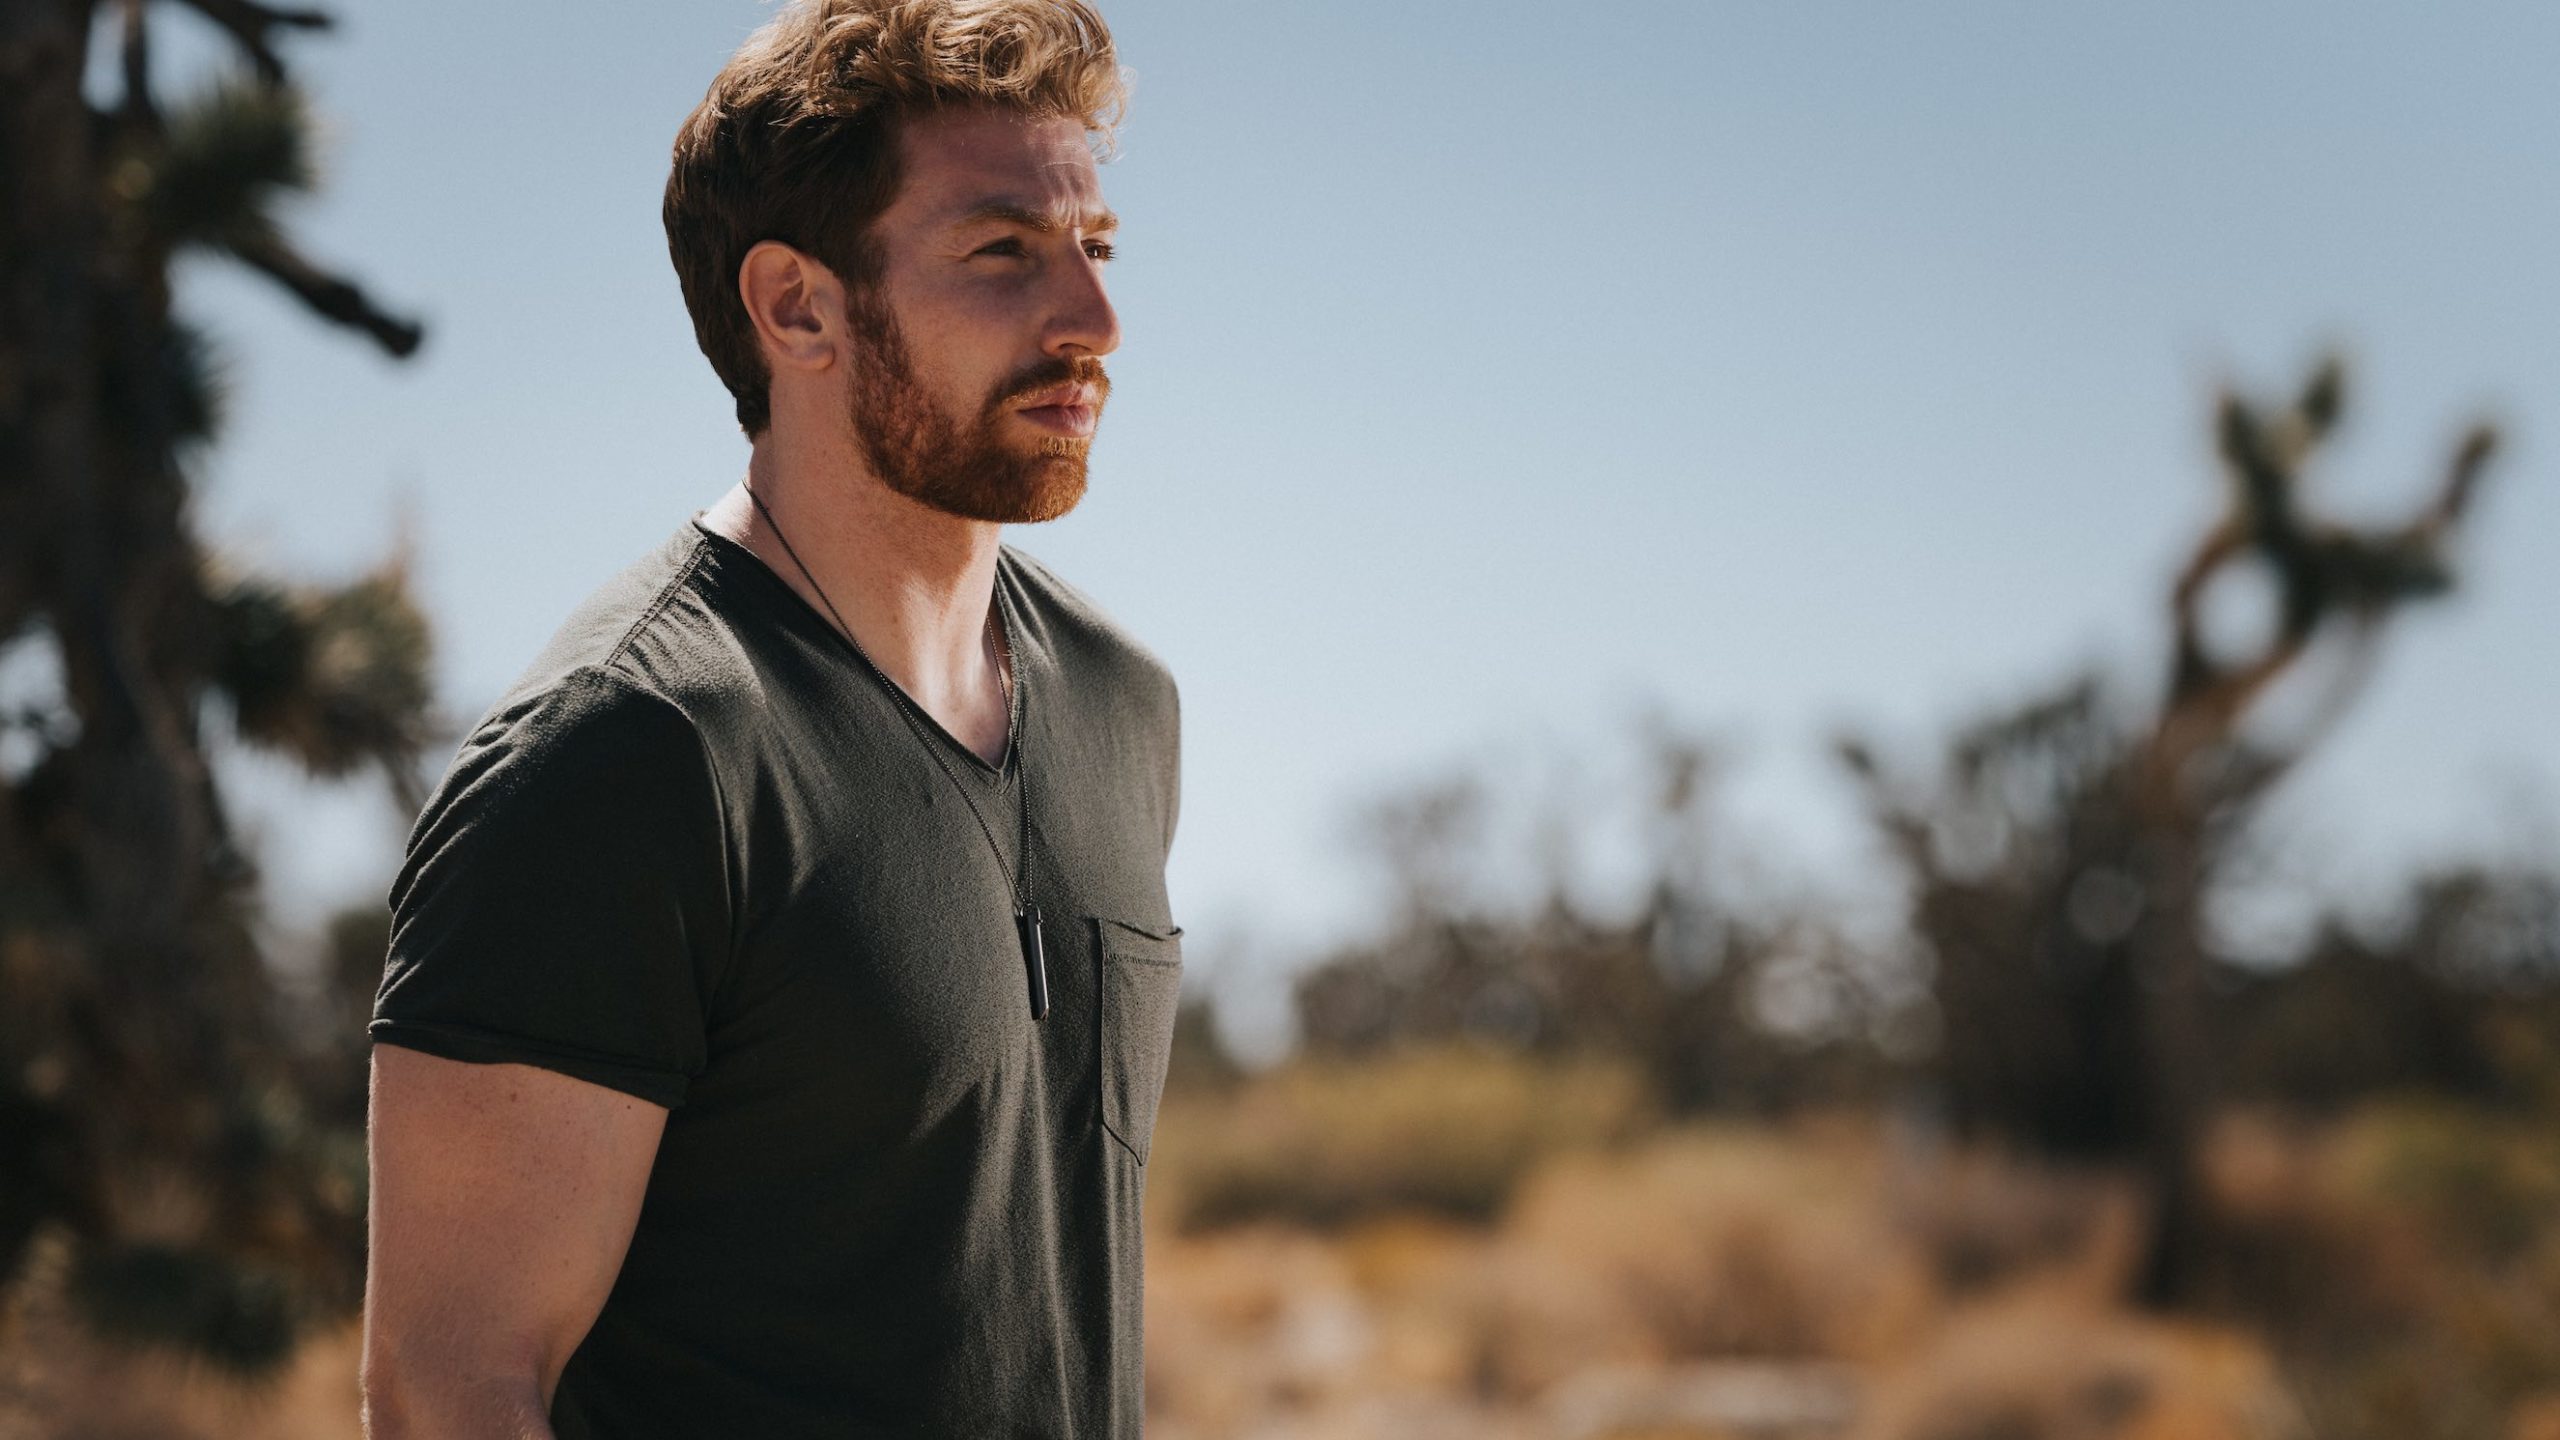 Muscular male with short, red hair and beard wearing a black tshirt looking off into the distance.